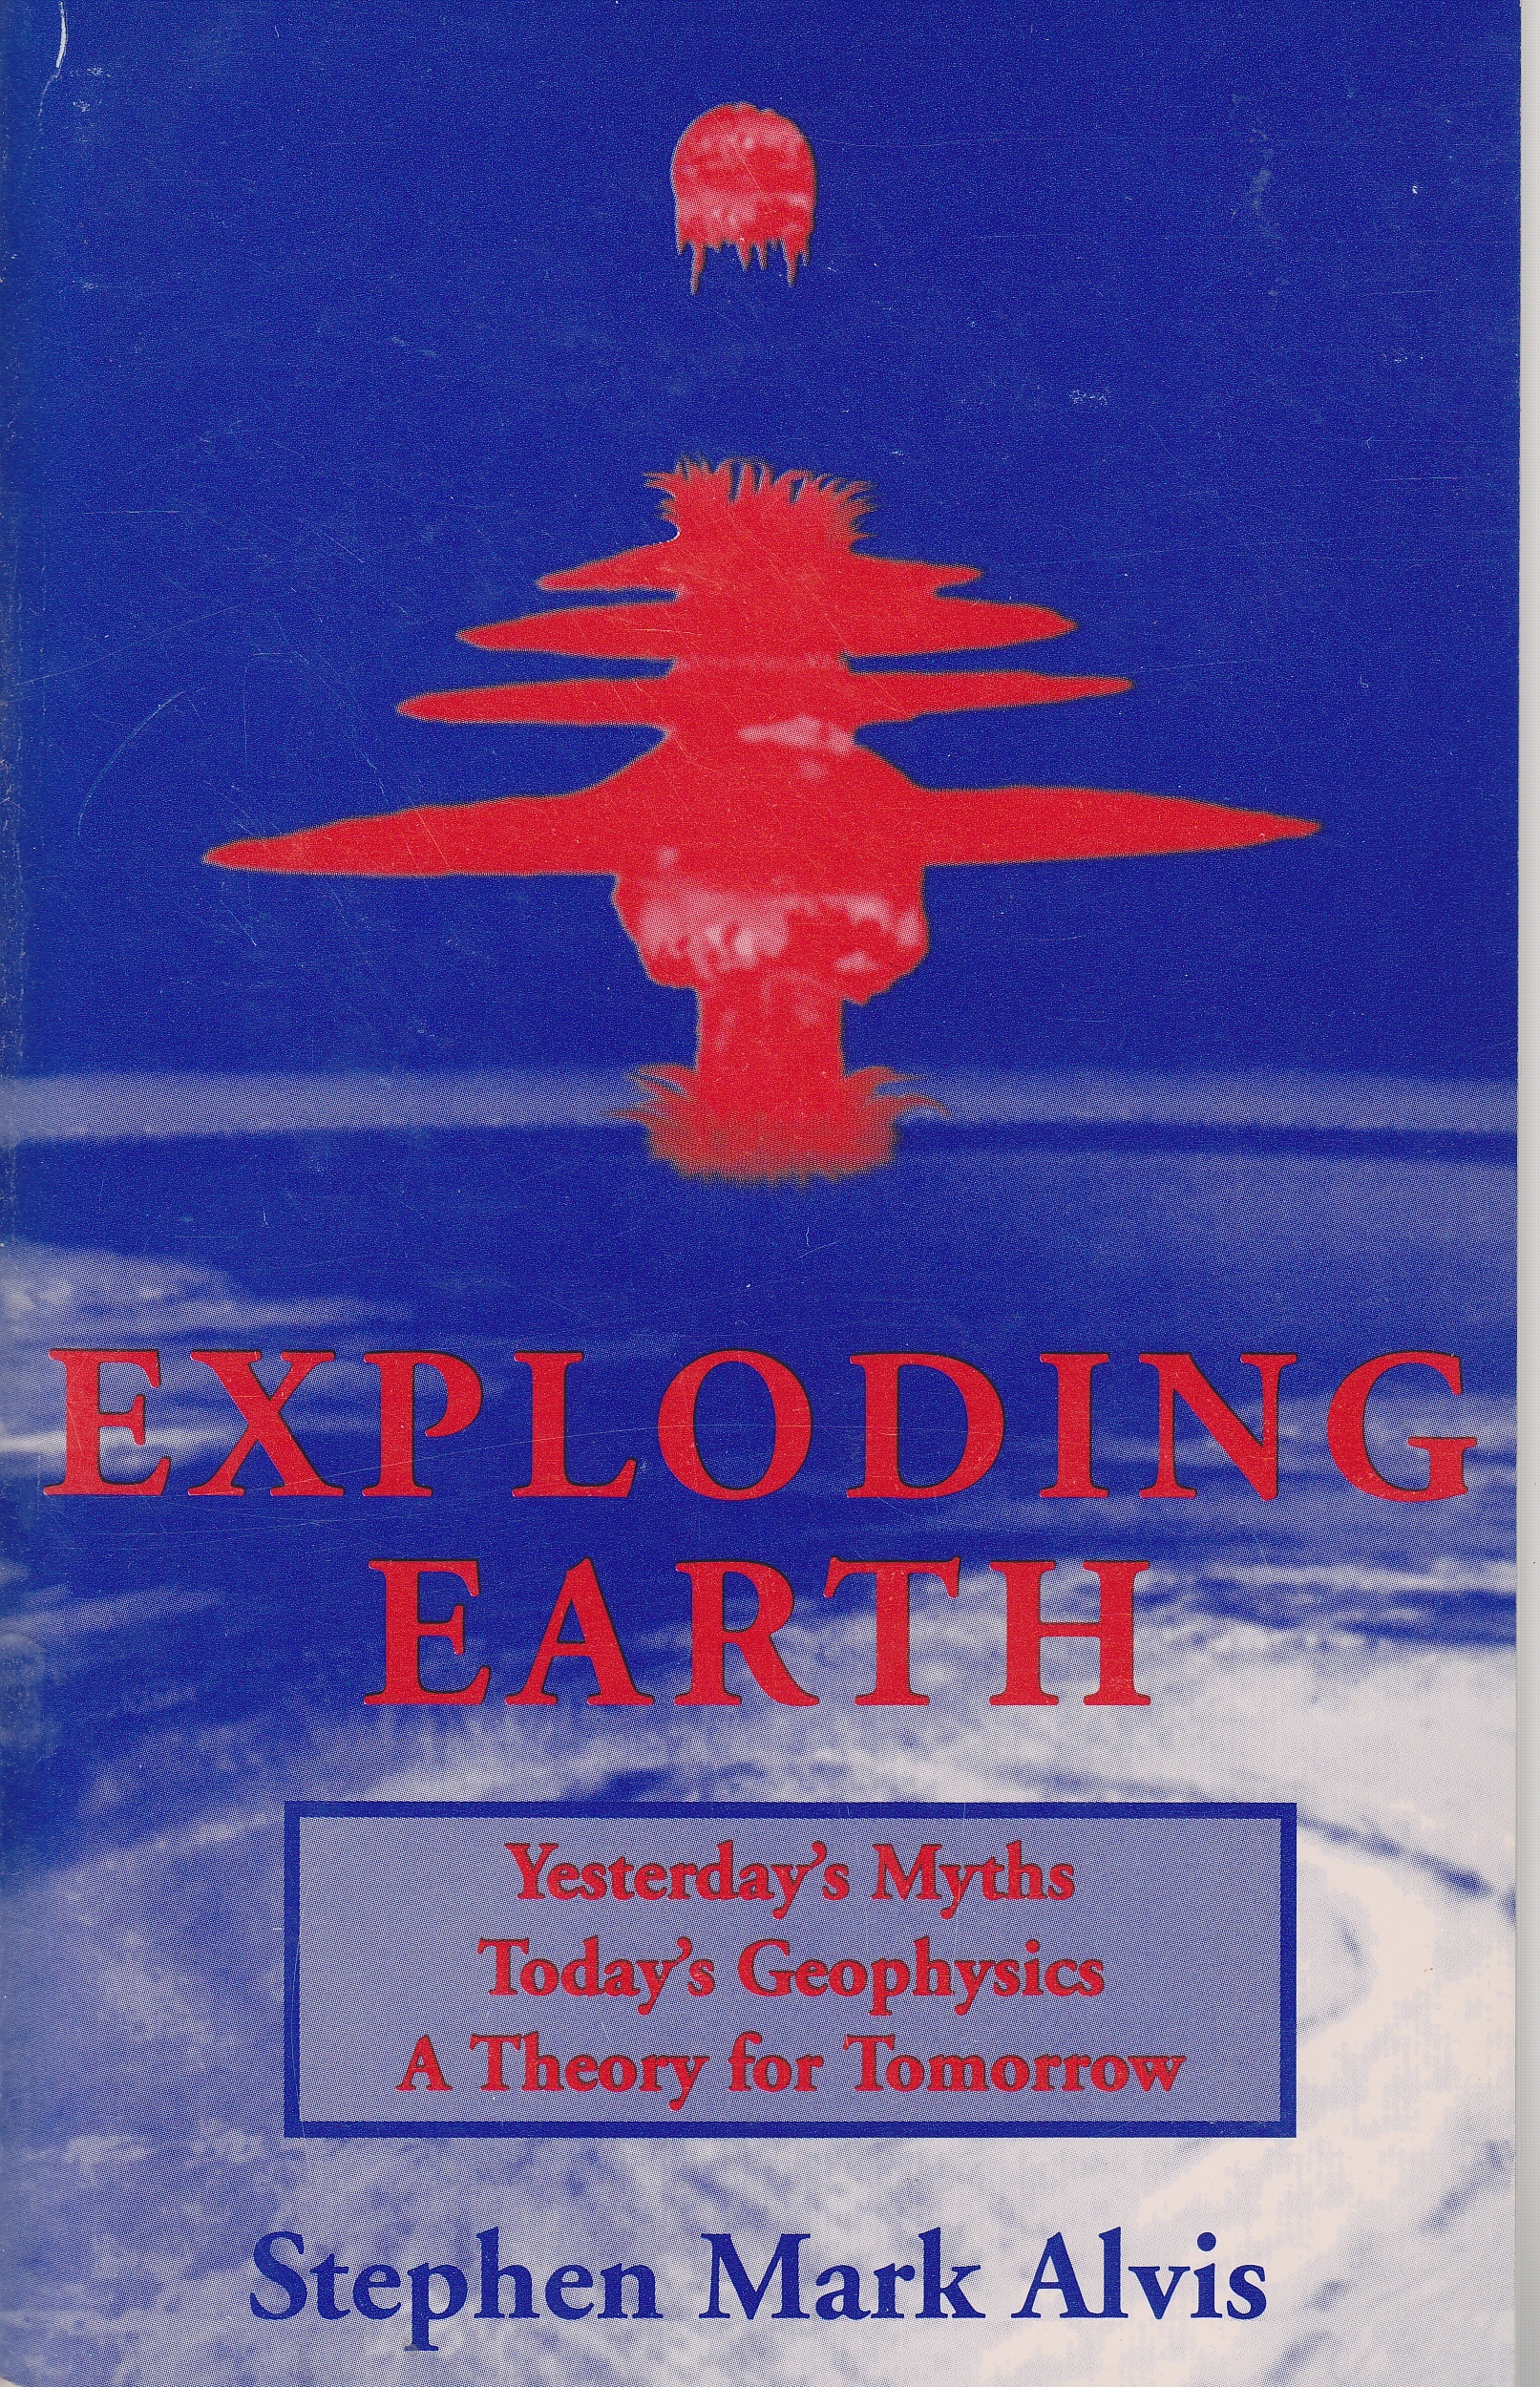 Image for Exploding Earth Yesterday's Myths, Today's Geophysics, a Theory for Tomorrow